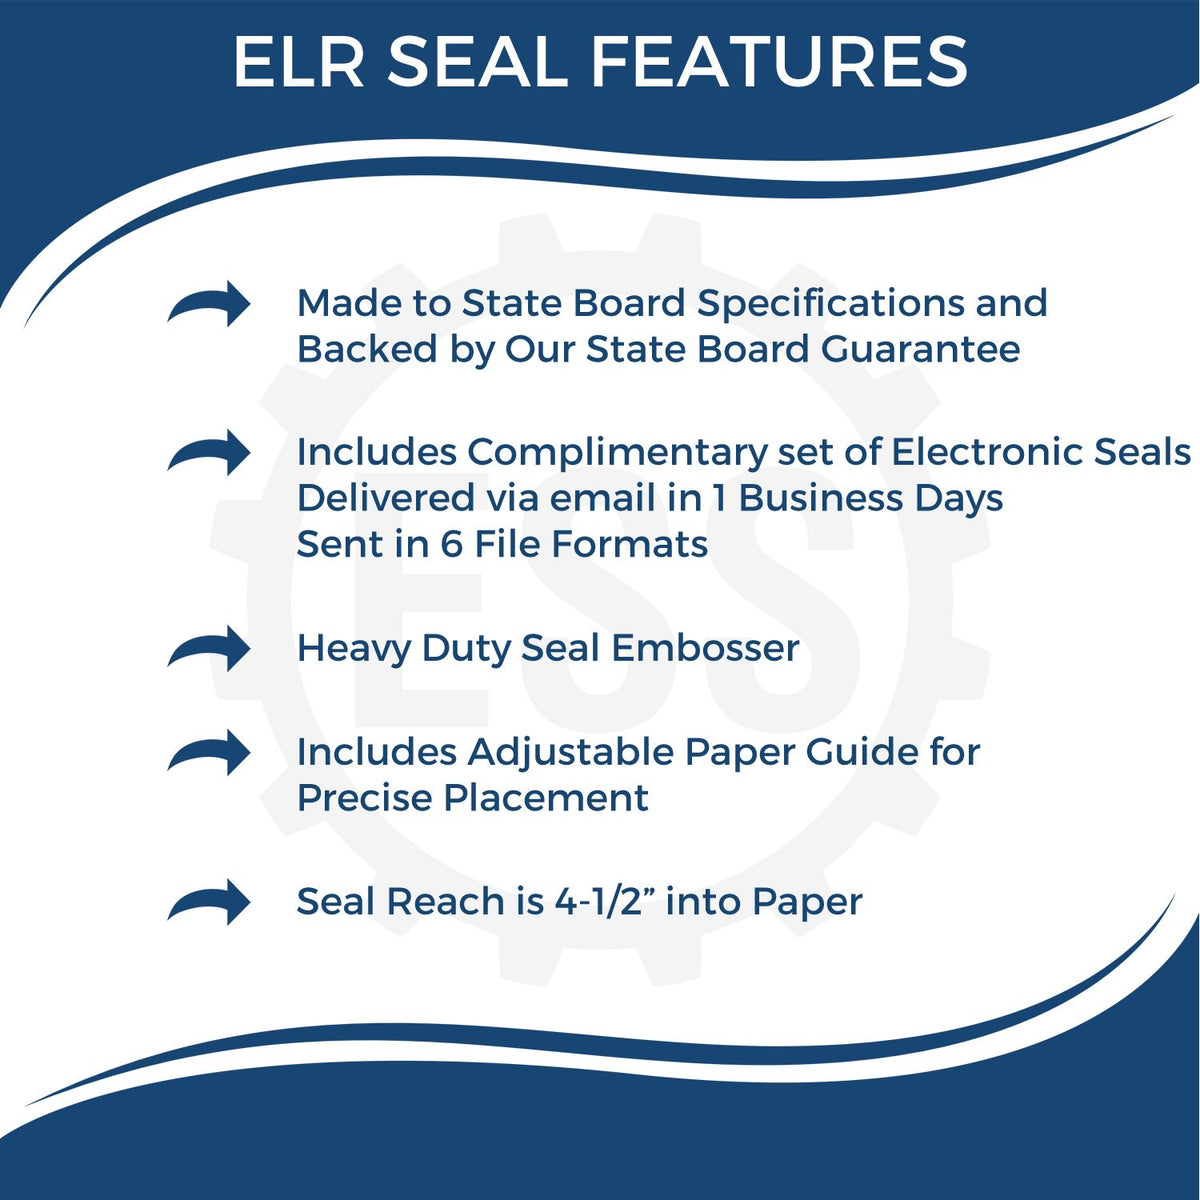 A picture of an infographic highlighting the selling points for the Extended Long Reach Vermont Architect Seal Embosser